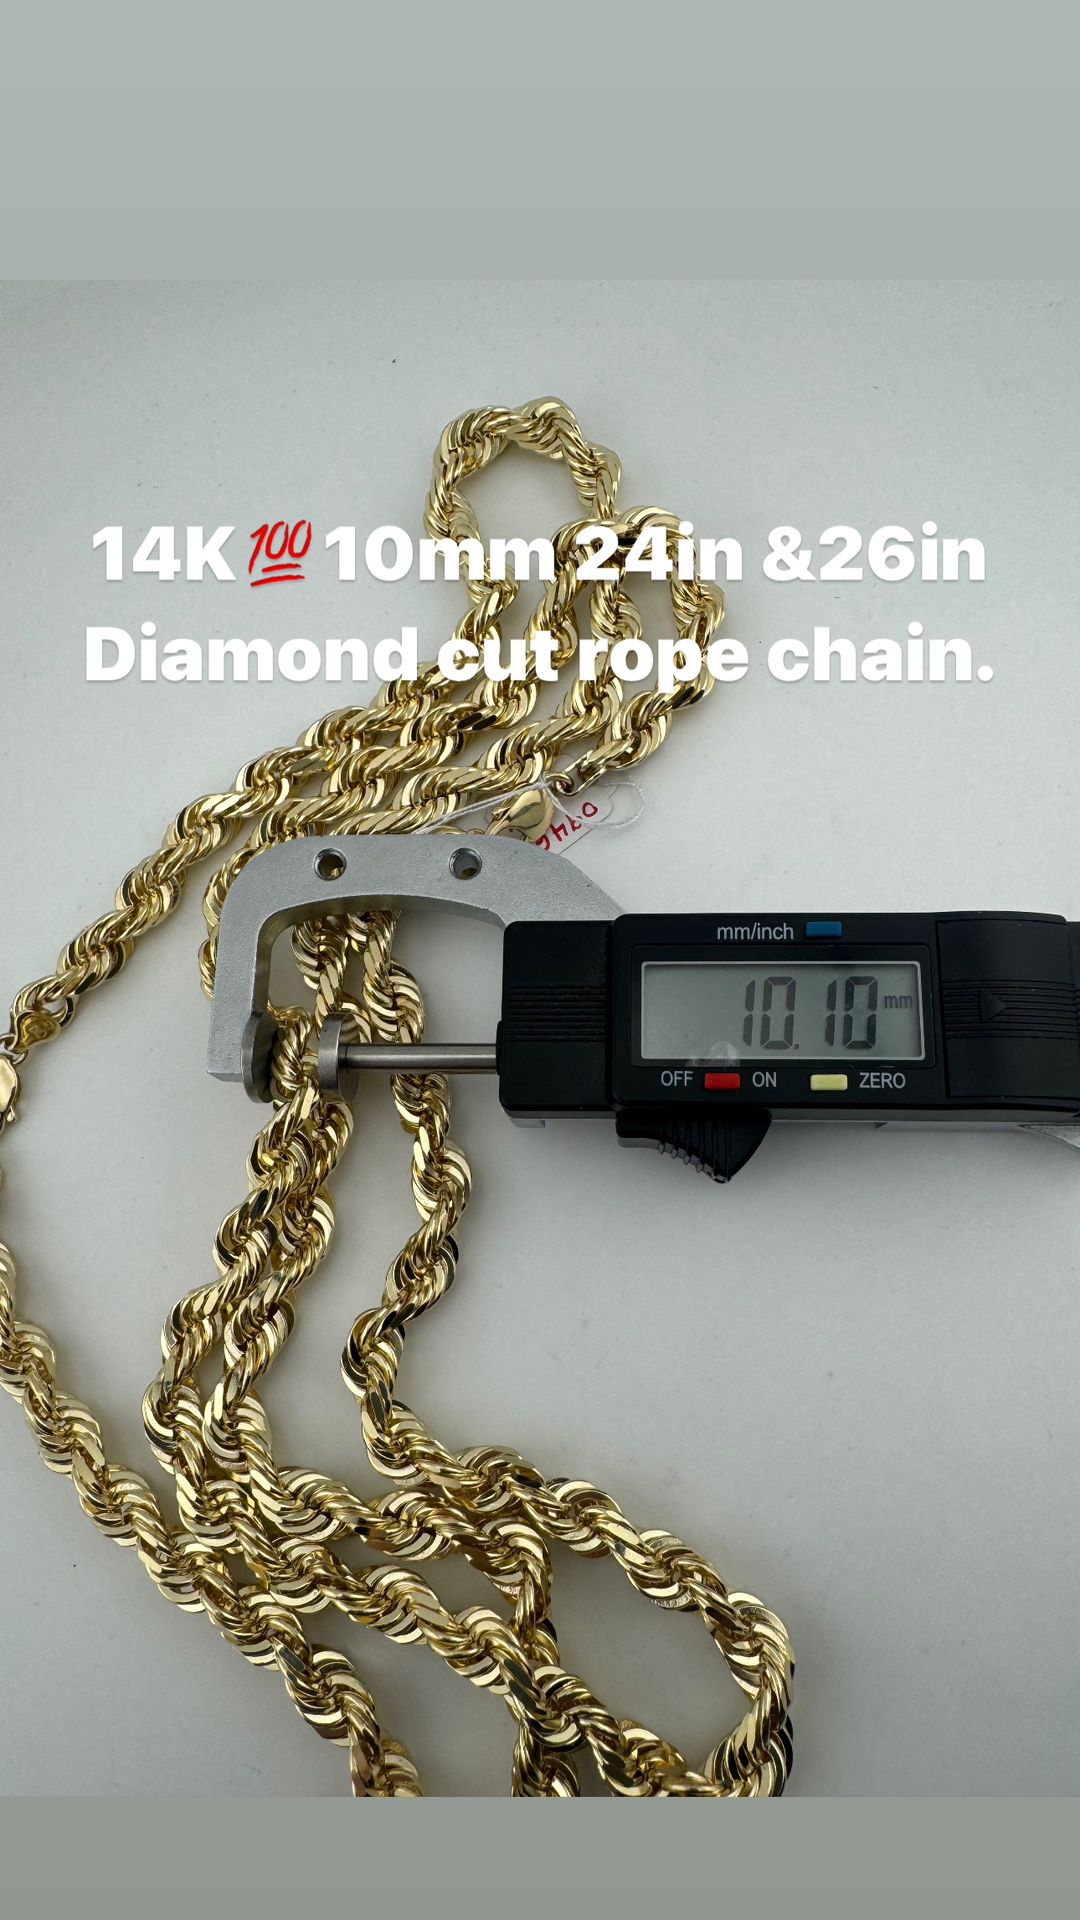 4K 💯GOLD 10mm 24in &26in diamond cur rope chain. brand new re stock.